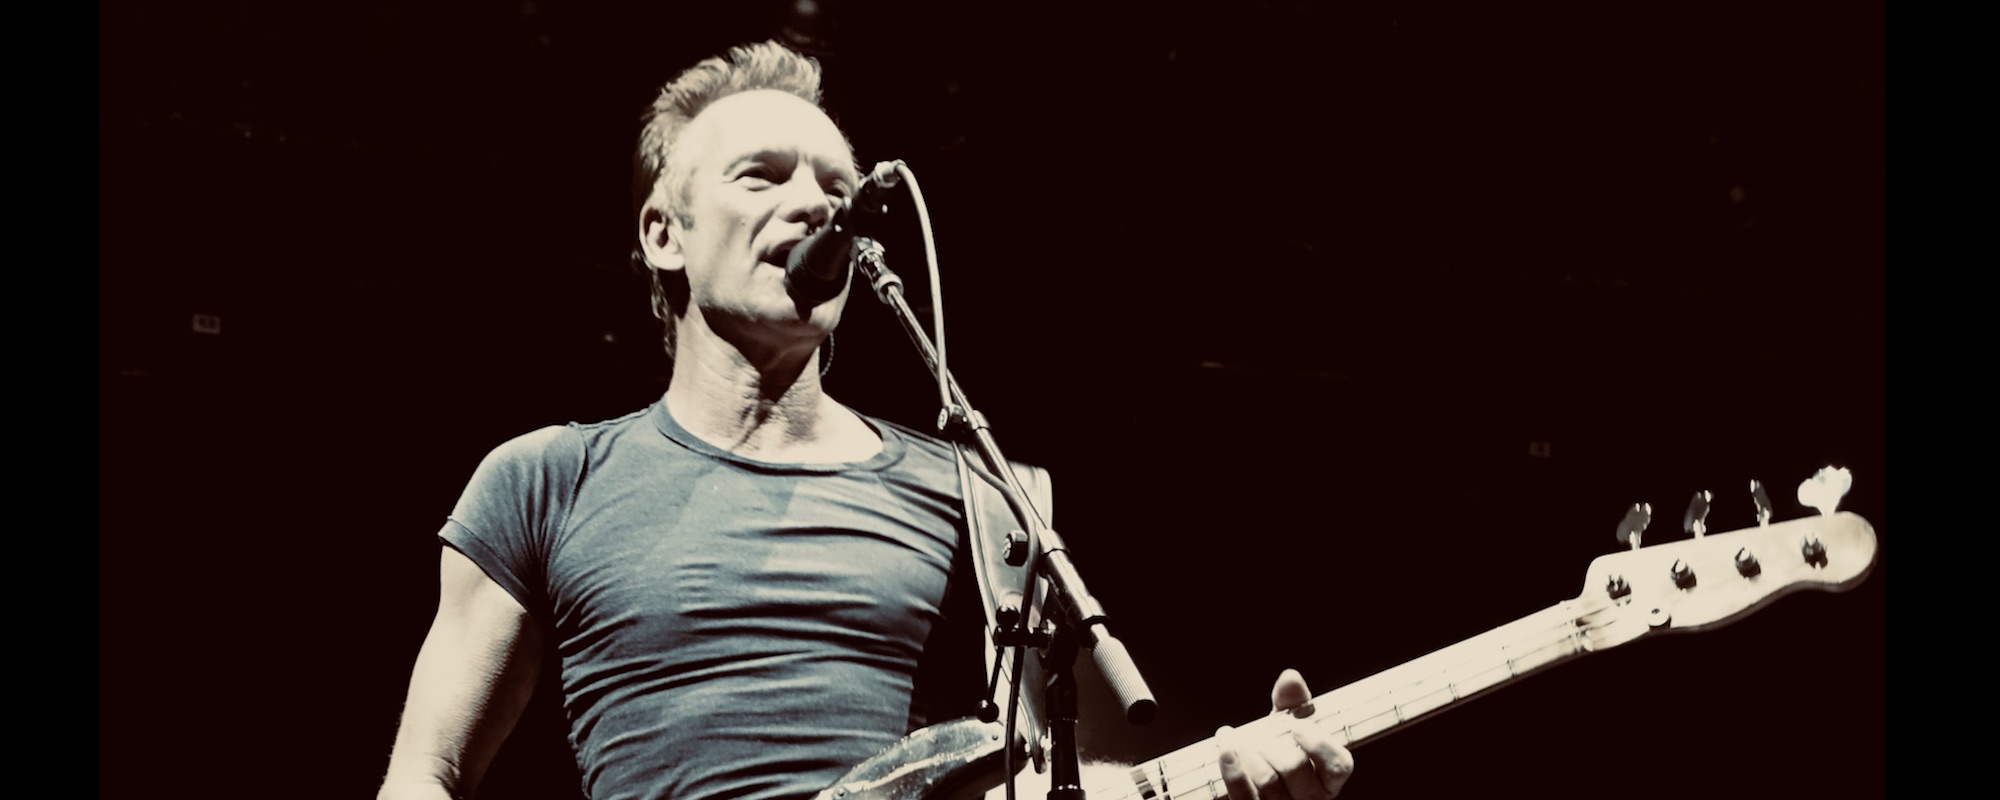 Sting Warns That Democracy is in “Grave Danger” at Recent Concert